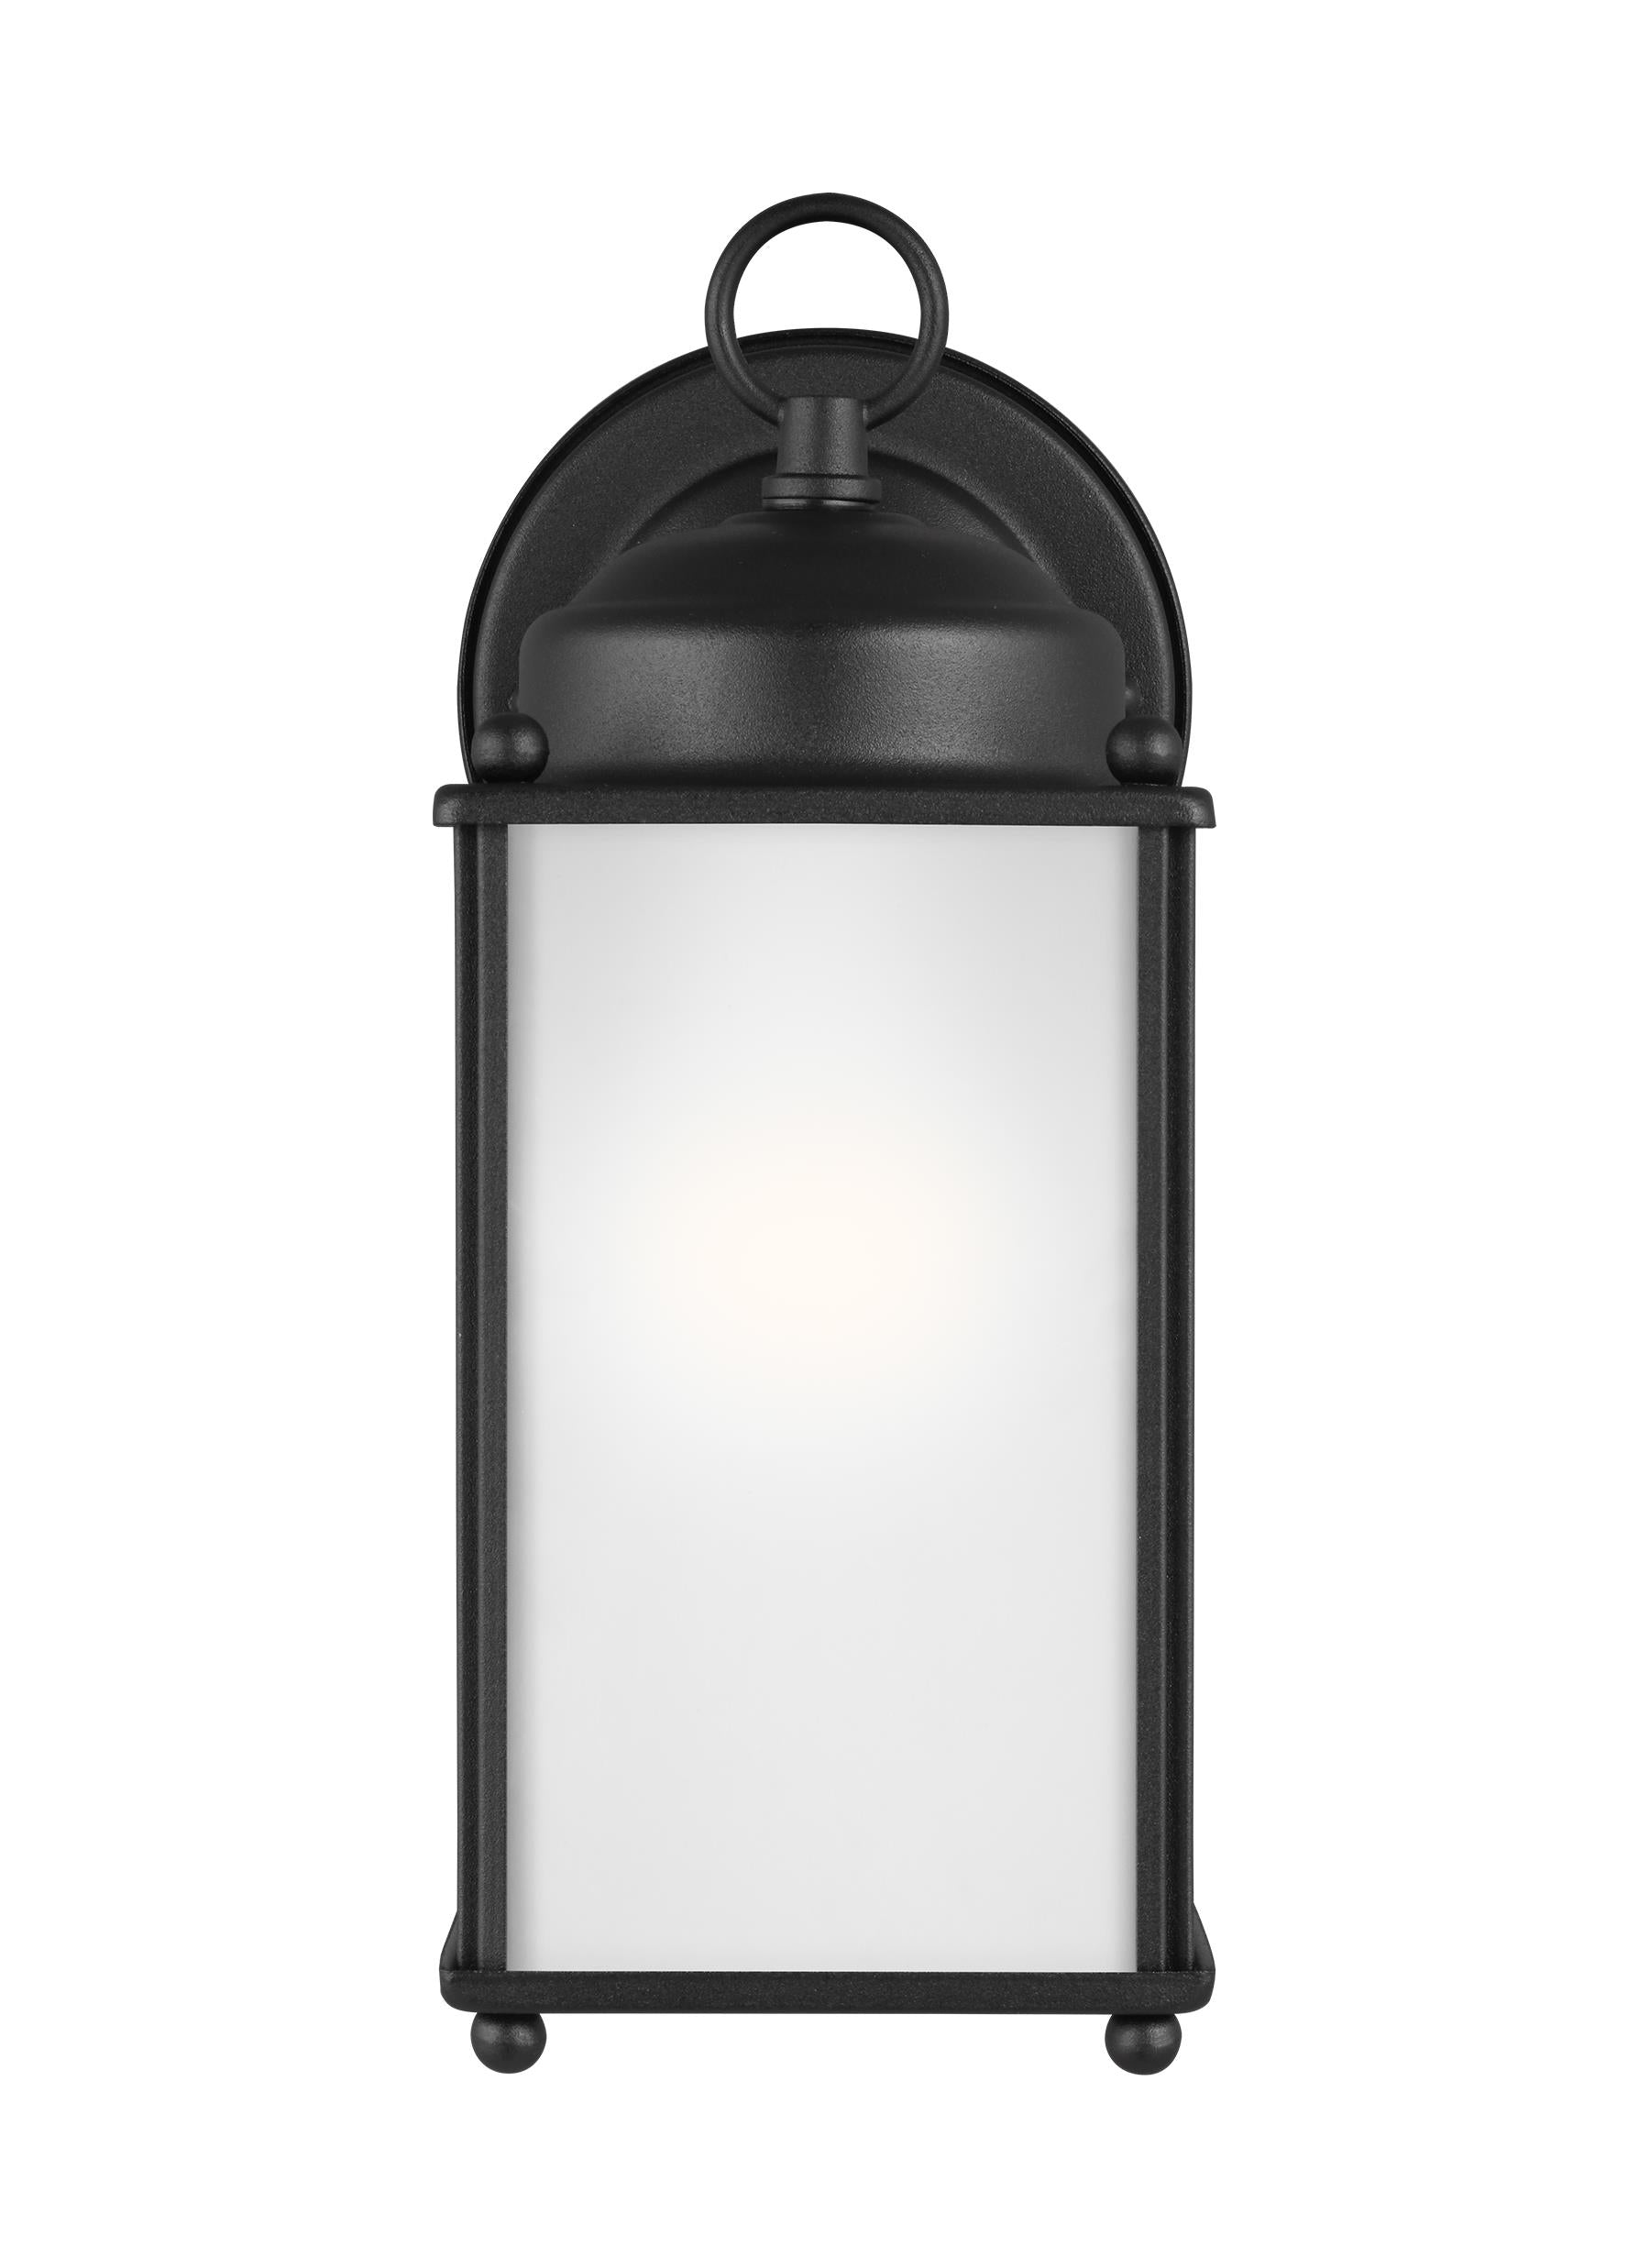 New Castle traditional 1-light outdoor exterior large wall lantern sconce in black finish with satin etched glass panels